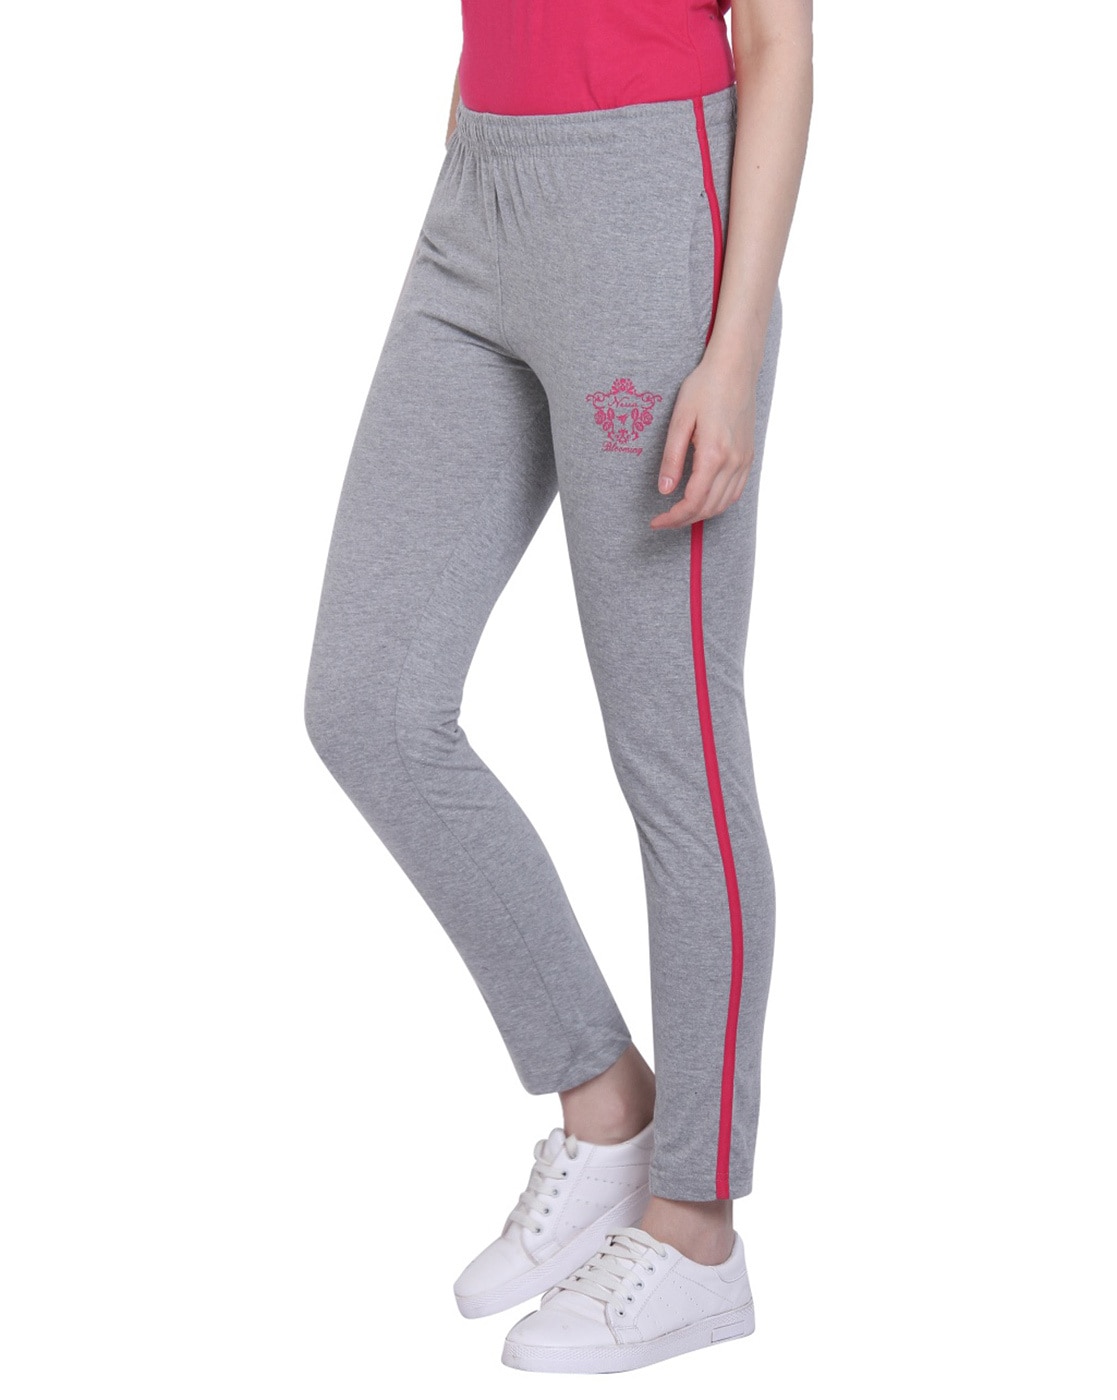 Buy Cotton Teal Blue Track pants for Women online in India - Cupidclothings  – Cupid Clothings